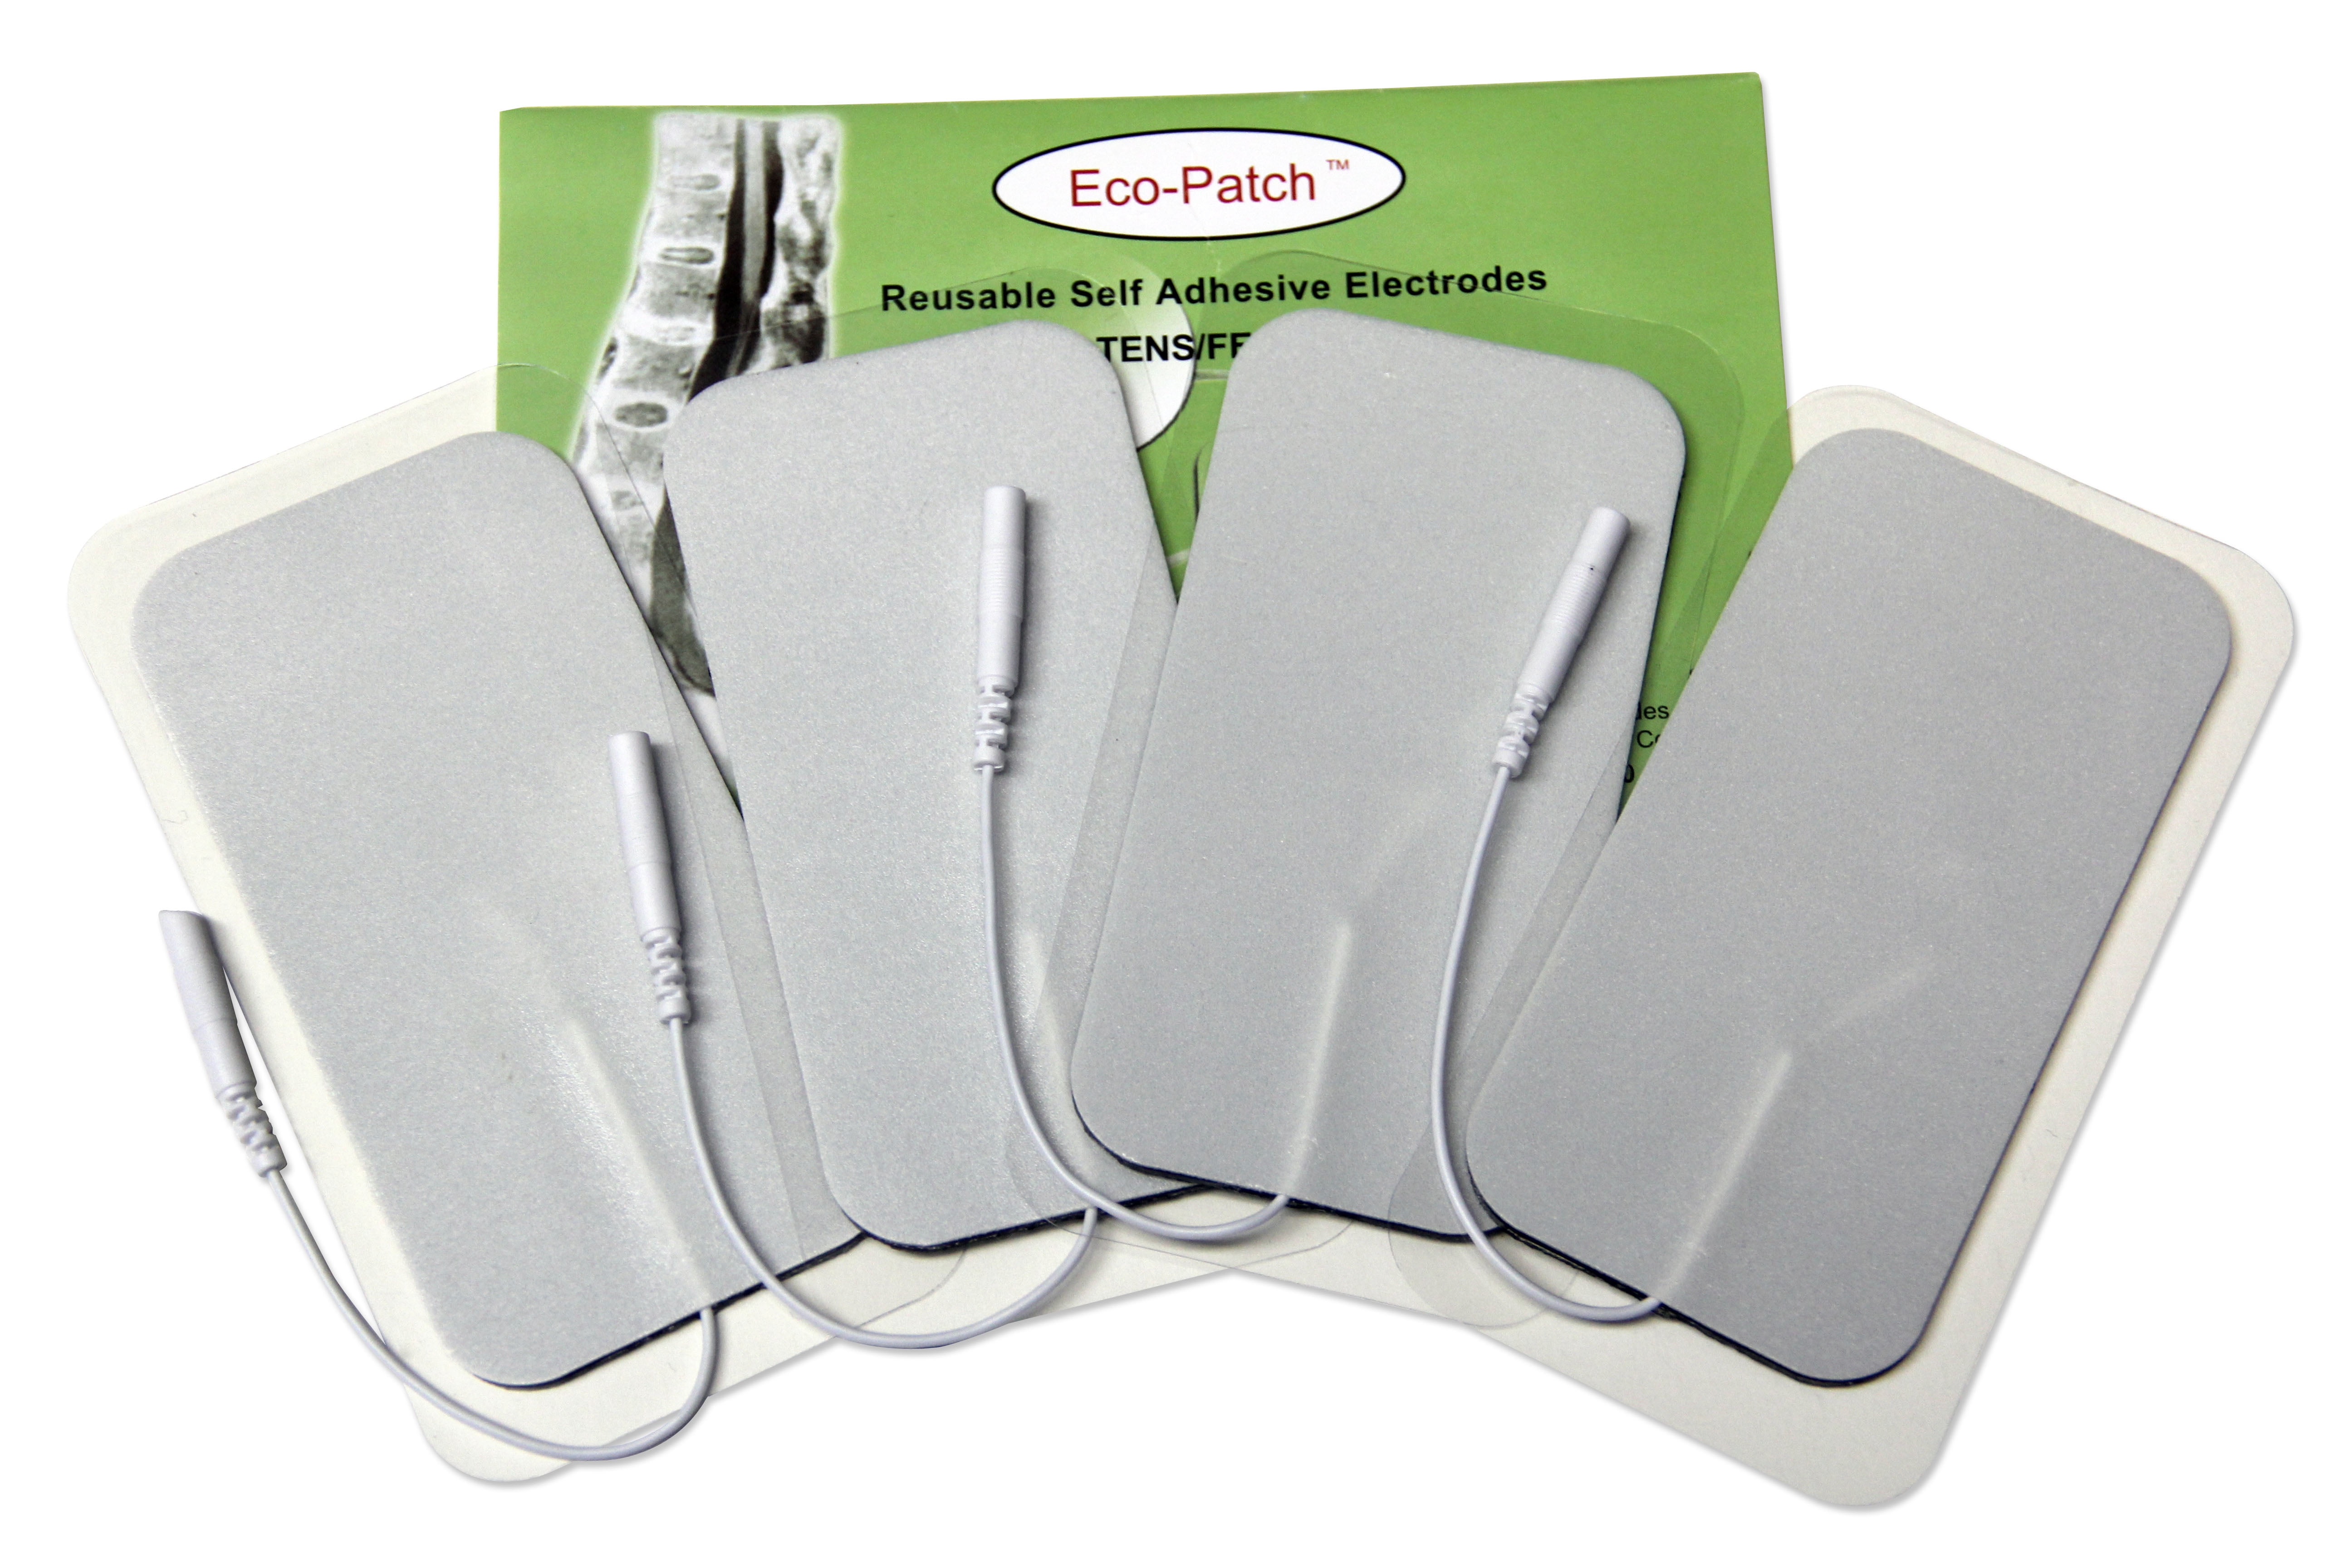 8 Large 2.0 inchx 4.0 Electrodes for Tens EMS Stimulators Gel Adhesive and Comfortable White Foam Backing by Eco Patch